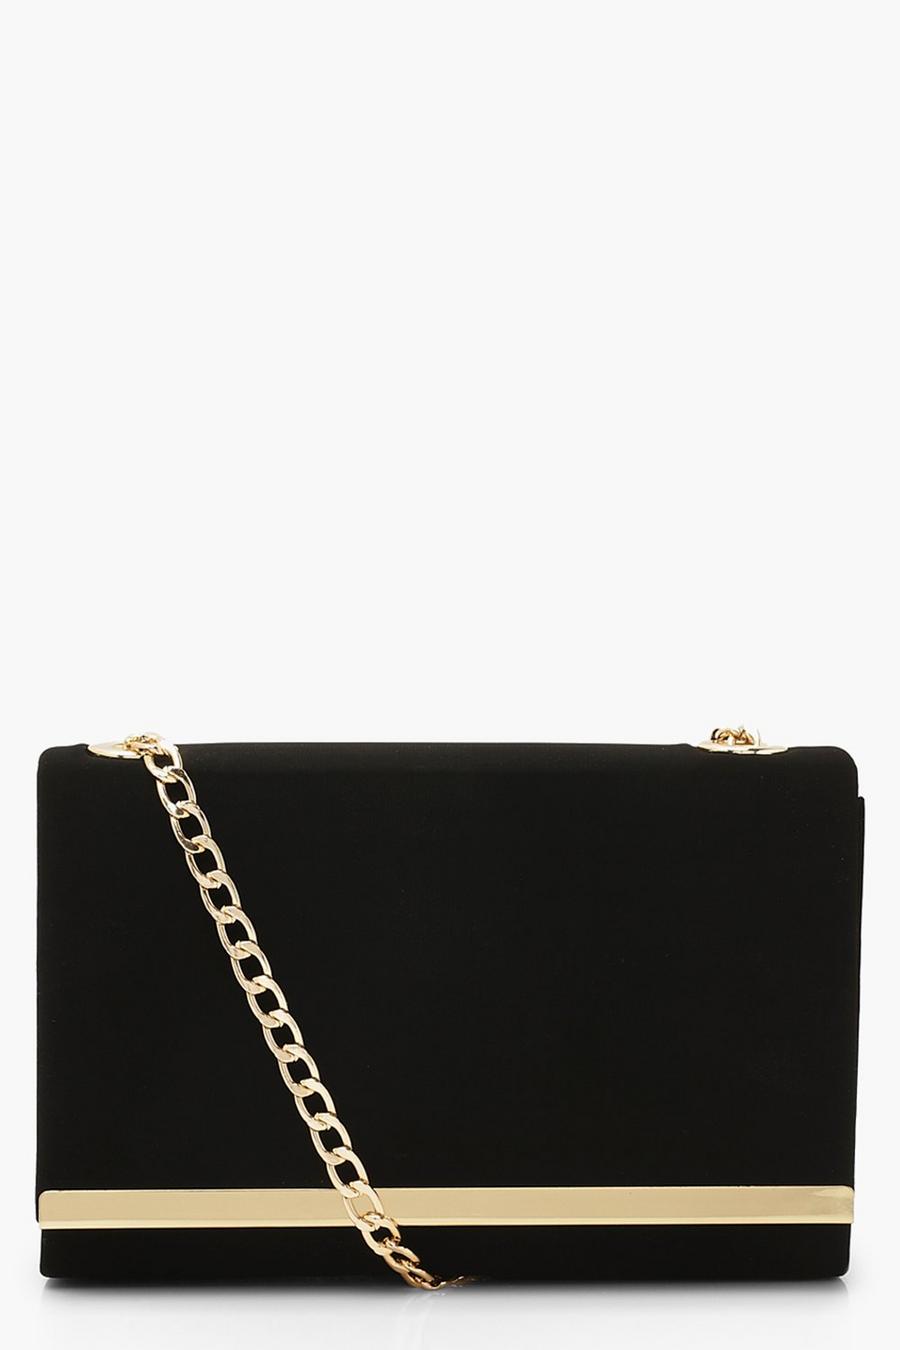 Black Structured Suedette Clutch Bag and Chain